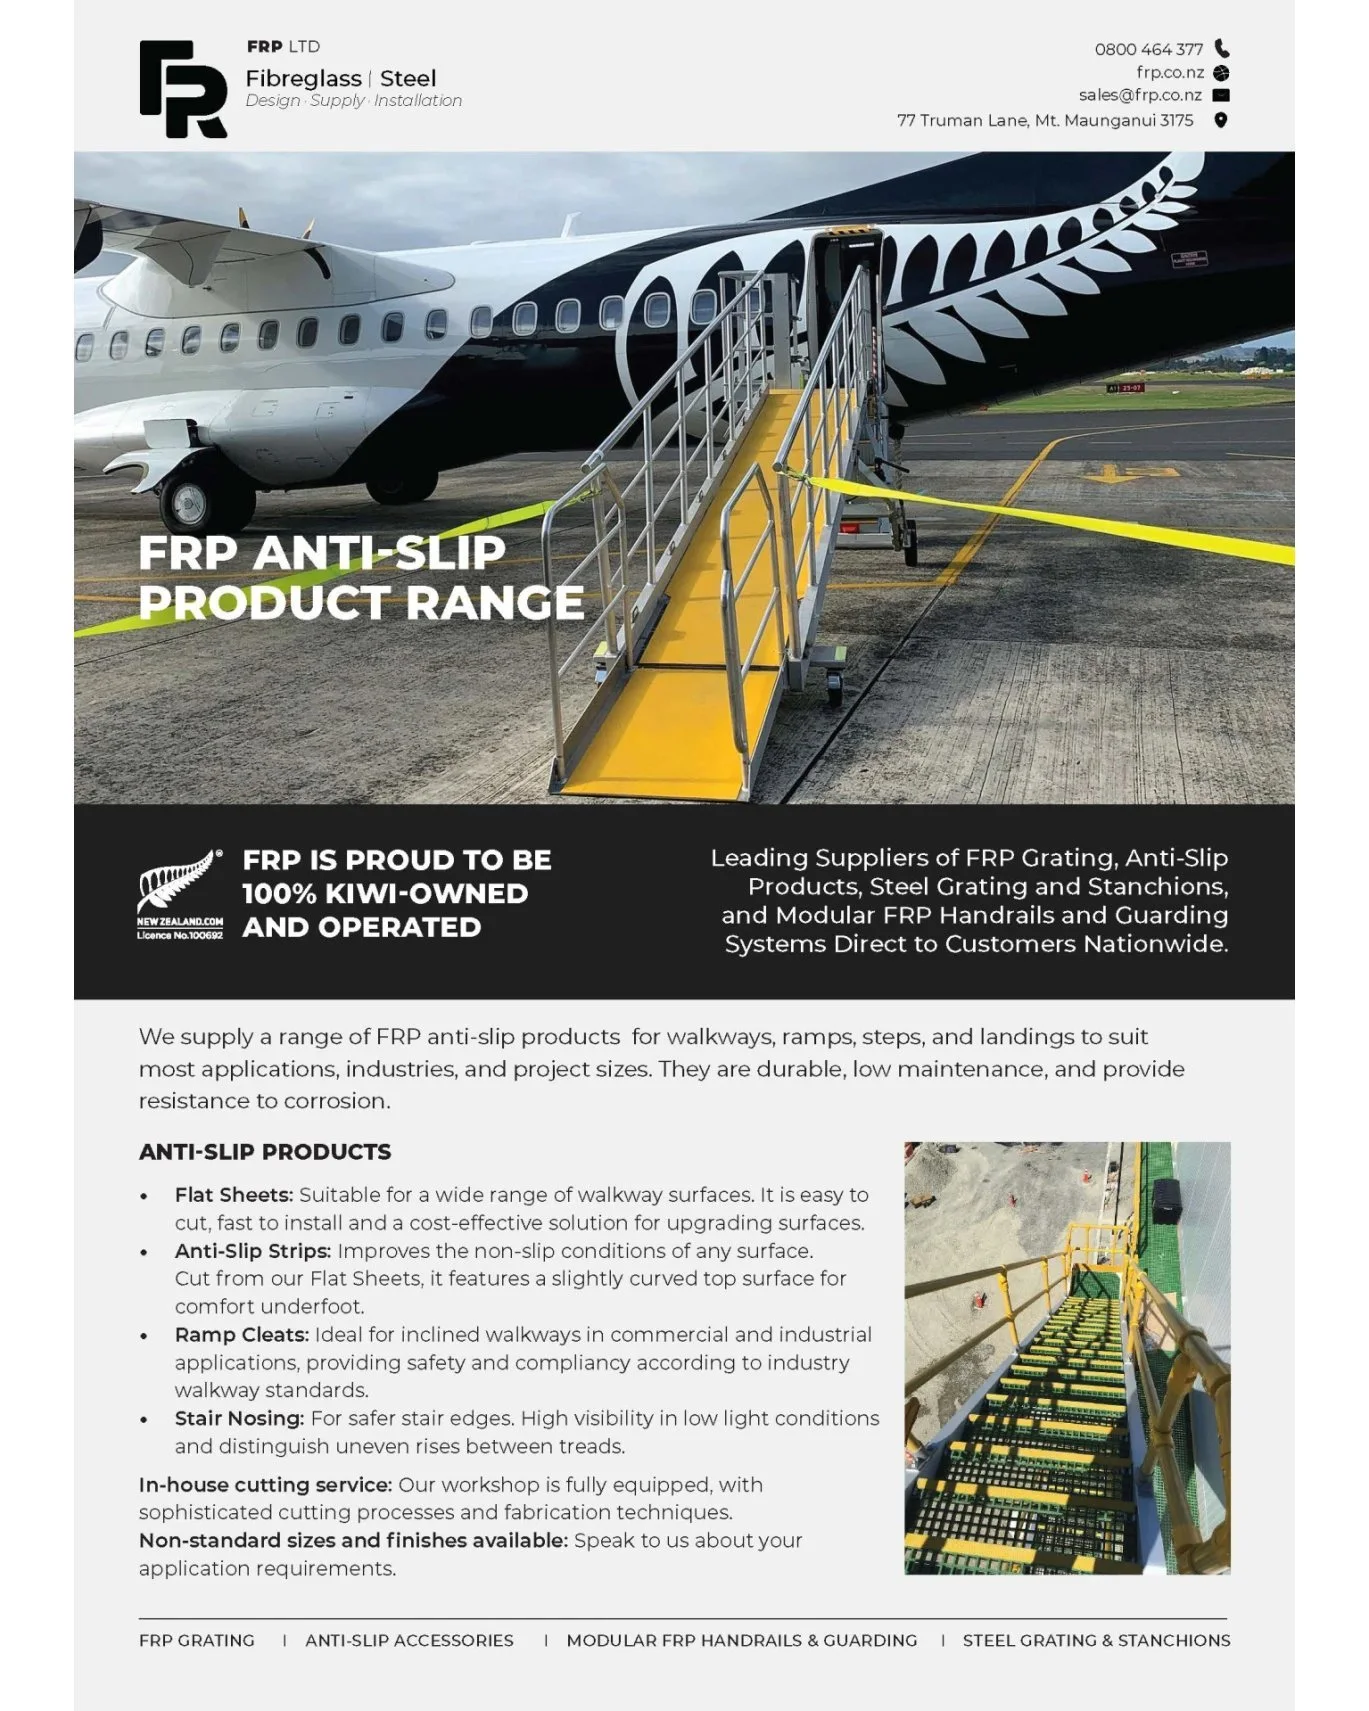 FRP anti-slip is essential for ensuring safety in wet weather conditions. Get organised to winter now!

#frp #frpproducts #antislip #nonslip #safety #walkways #footpaths #stairs #nzarchitects #nzcouncils #commercial